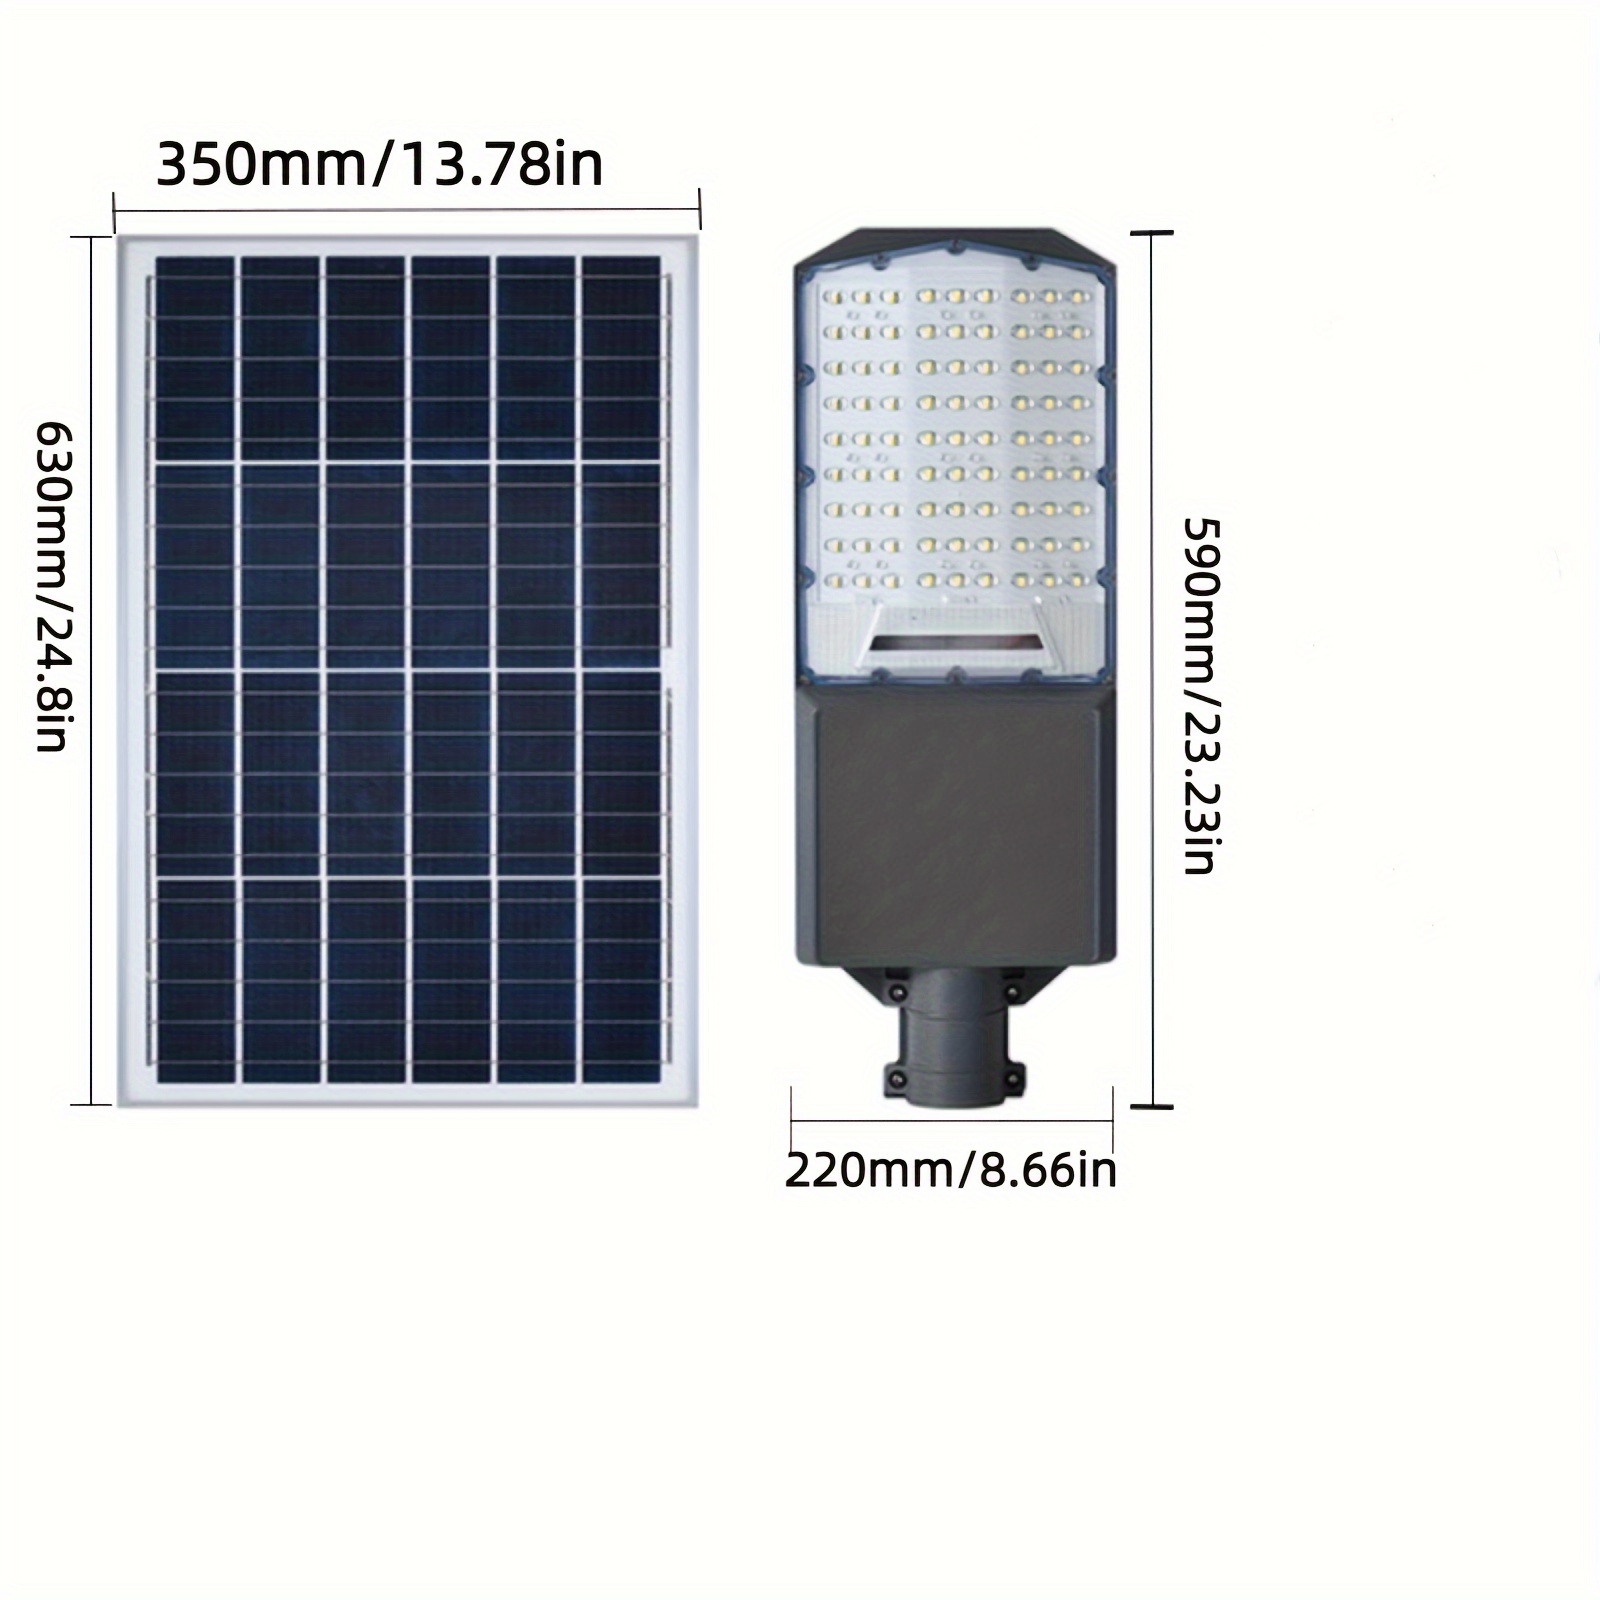 1pc curved lens 320 luminous solar lamp battery capacity 25ah 3 2v light control time and space remote control suitable for courtyards roads front doors playgrounds free light pole remote control wall mounting parts package details 5